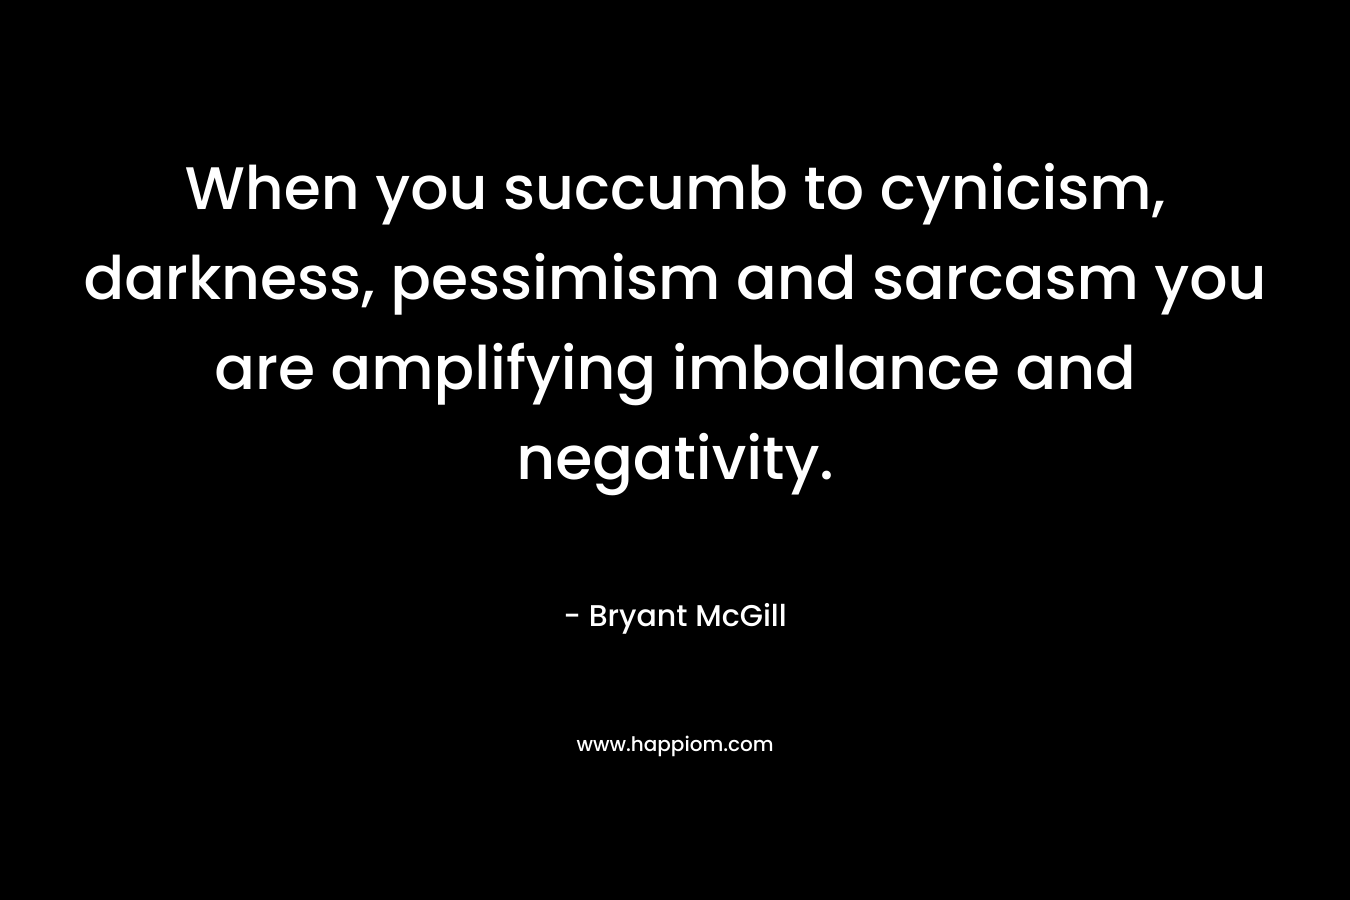 When you succumb to cynicism, darkness, pessimism and sarcasm you are amplifying imbalance and negativity.